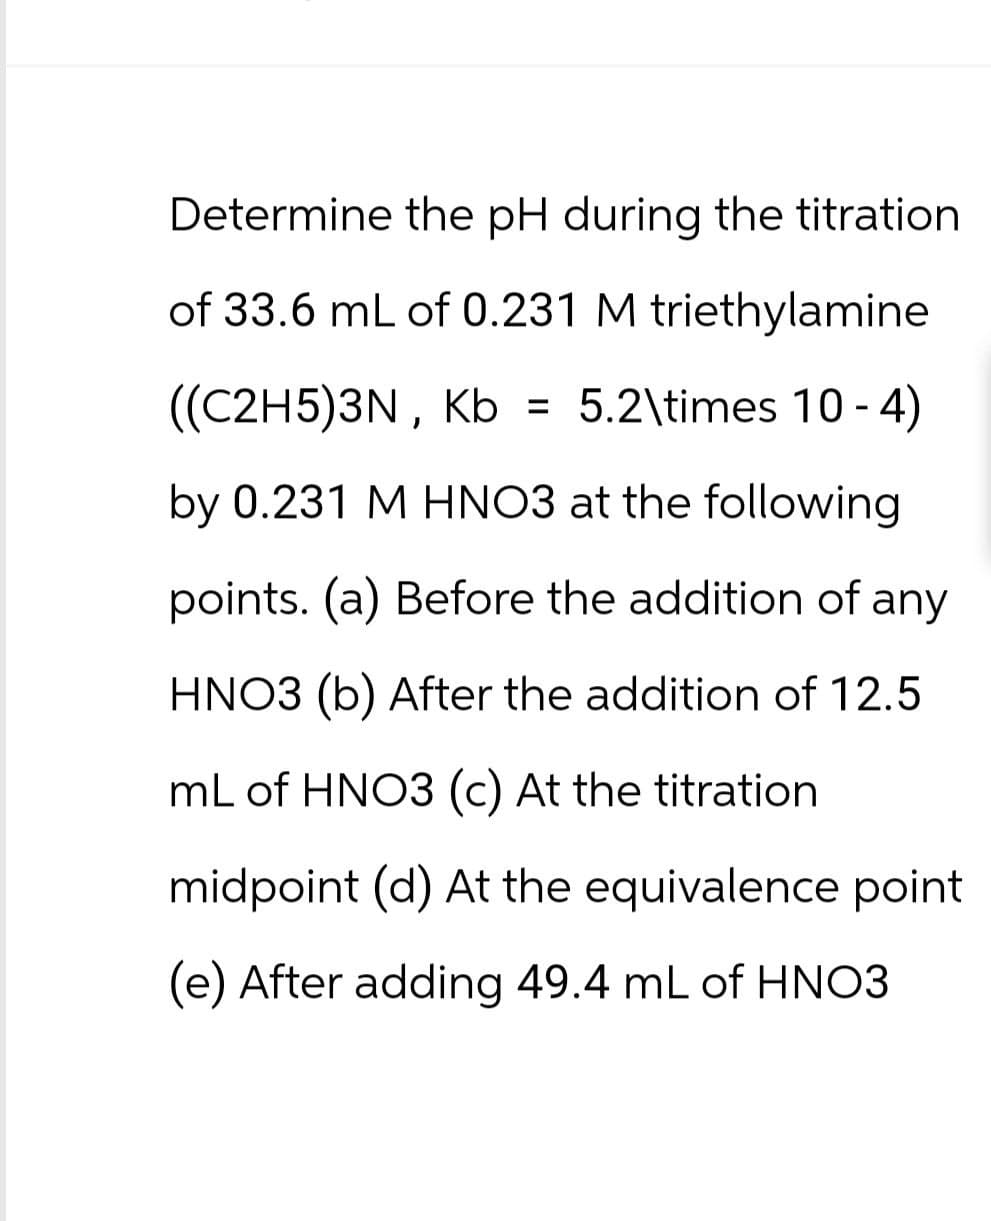 Determine the pH during the titration
of 33.6 mL of 0.231 M triethylamine
((C2H5)3N, Kb = 5.2\times 10-4)
by 0.231 M HNO3 at the following
points. (a) Before the addition of any
HNO3 (b) After the addition of 12.5
mL of HNO3 (c) At the titration.
midpoint (d) At the equivalence point
(e) After adding 49.4 mL of HNO3